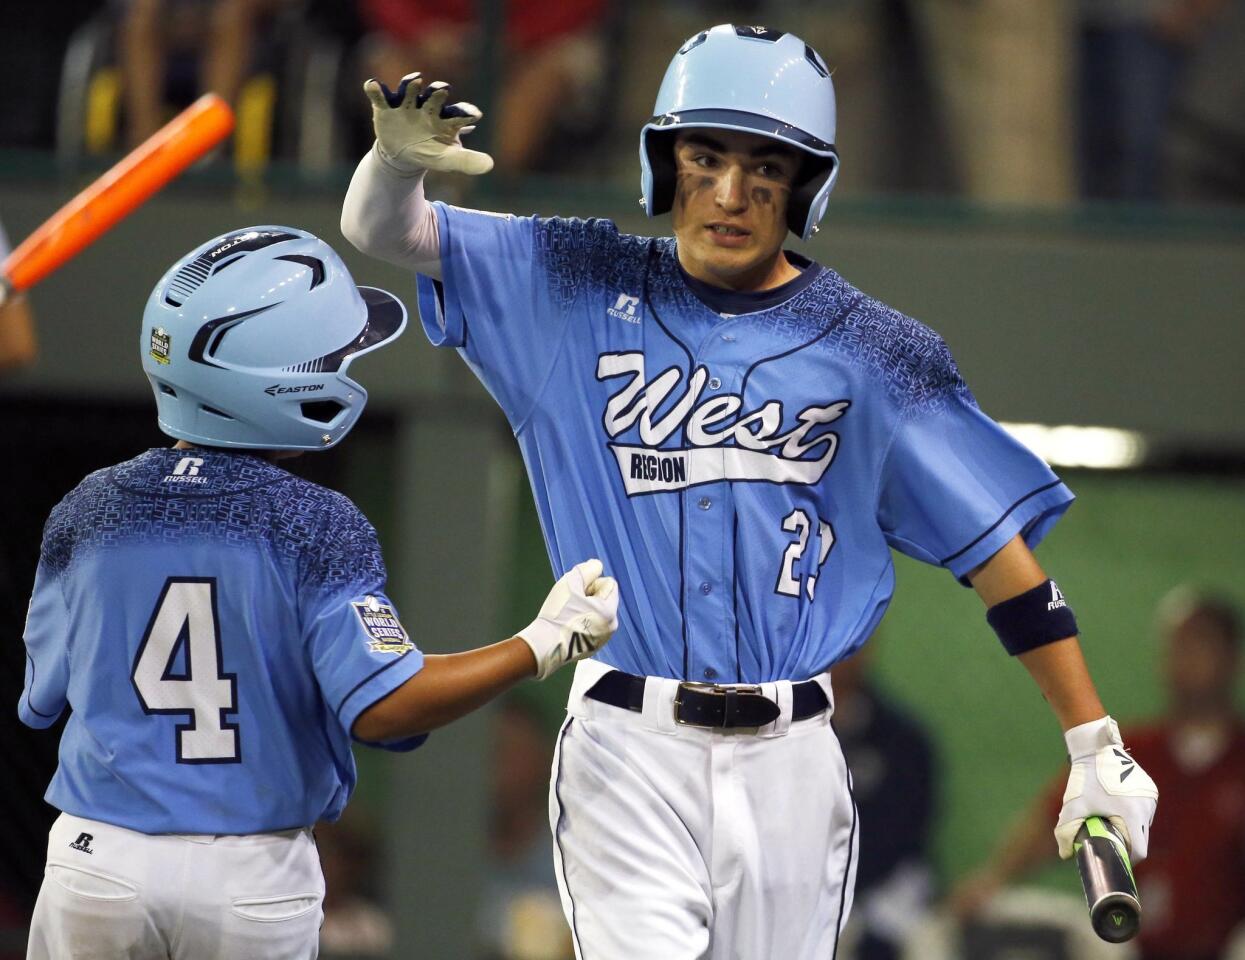 acob Baptista (23) celebrates with Cameron Barbabosa (4) after scoring on a hit by Dante Schmid during the first inning.